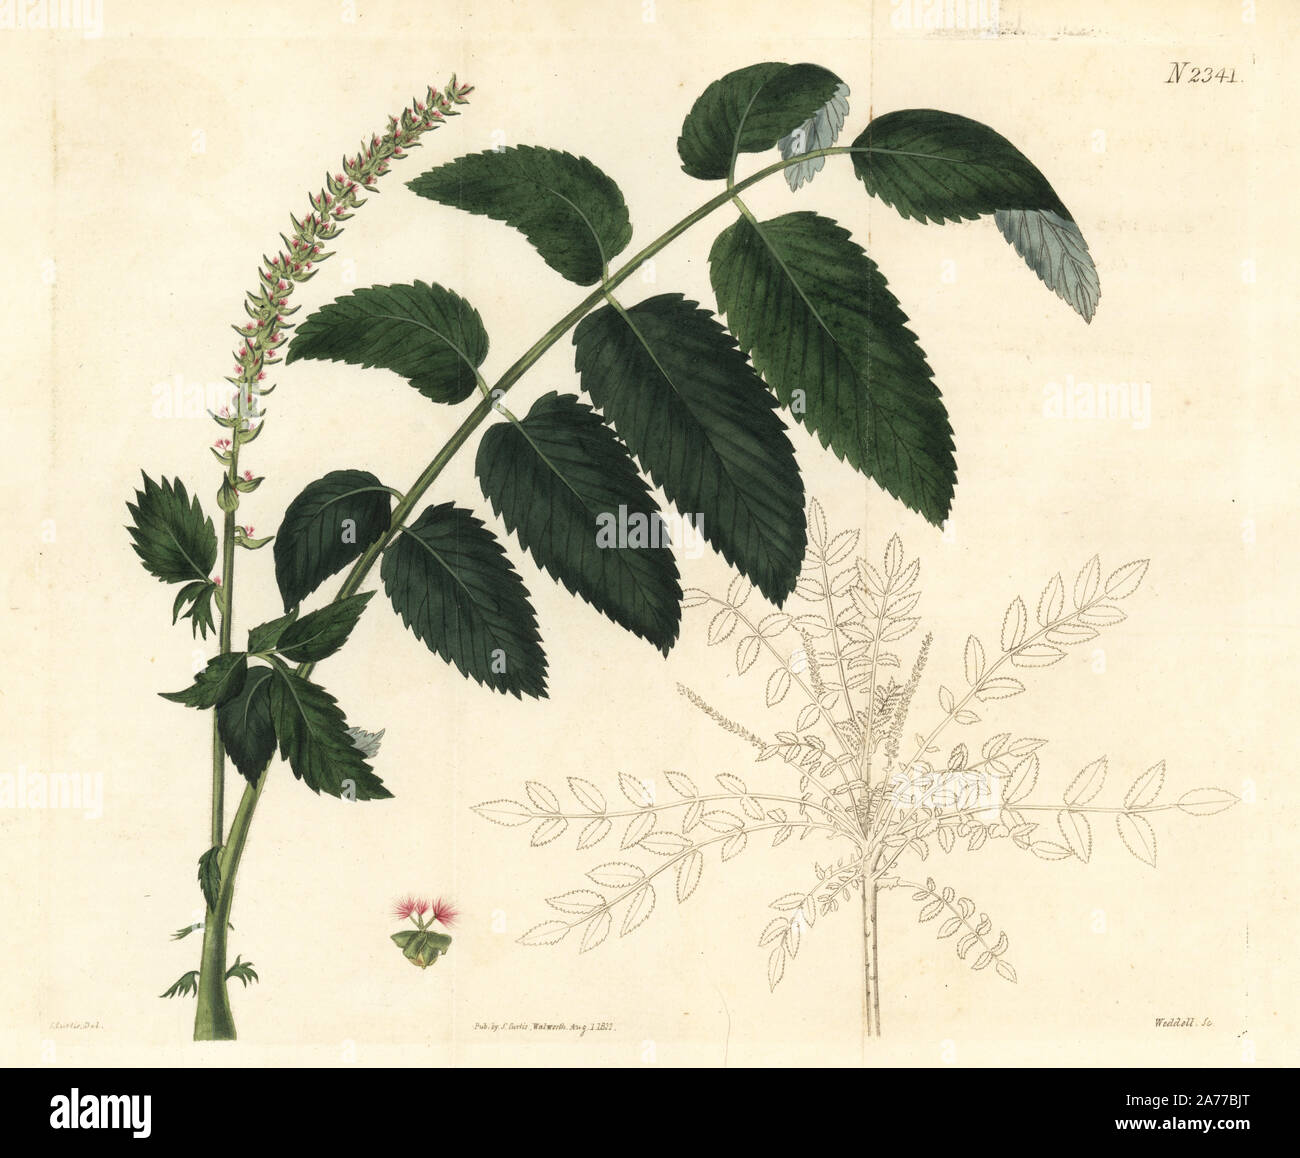 Smooth shrubby burnet, Bencomia caudata (Poterium caudatum). Handcoloured copperplate engraving by Weddell after an illustration by John Curtis from Samuel Curtis's 'Botanical Magazine,' London, 1822. Stock Photo